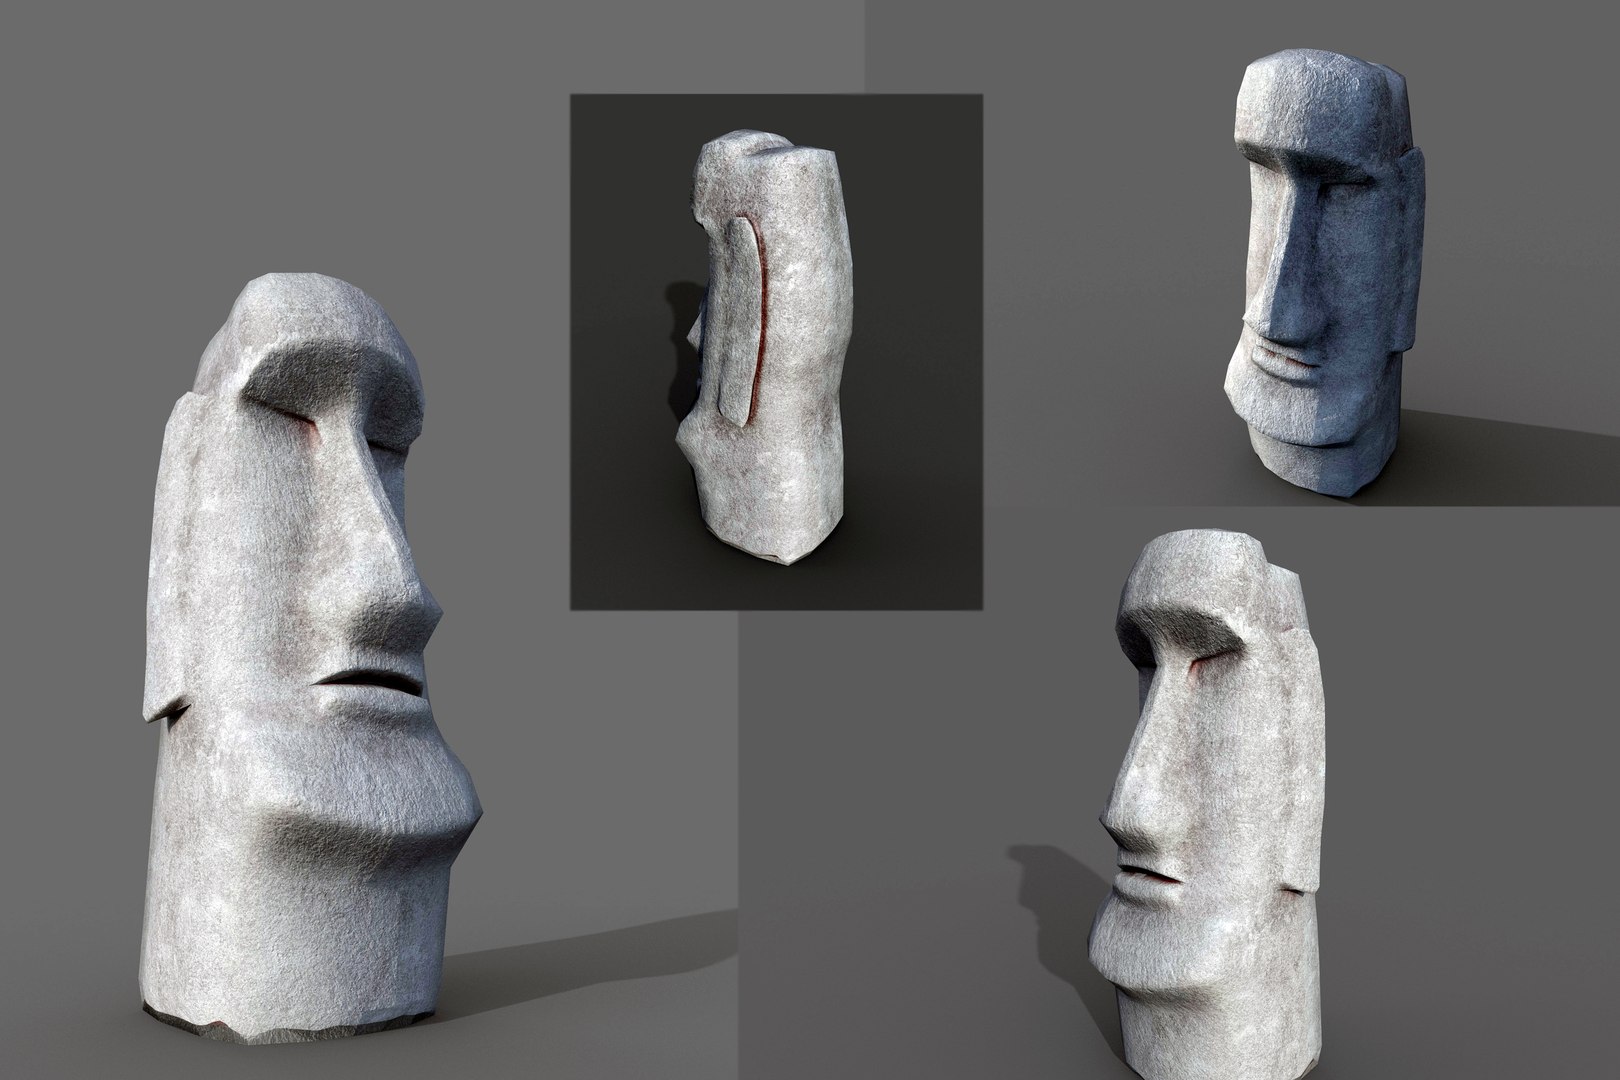 Moai Head for LUCKY 13 Figure by Cruiseboost, Download free STL model